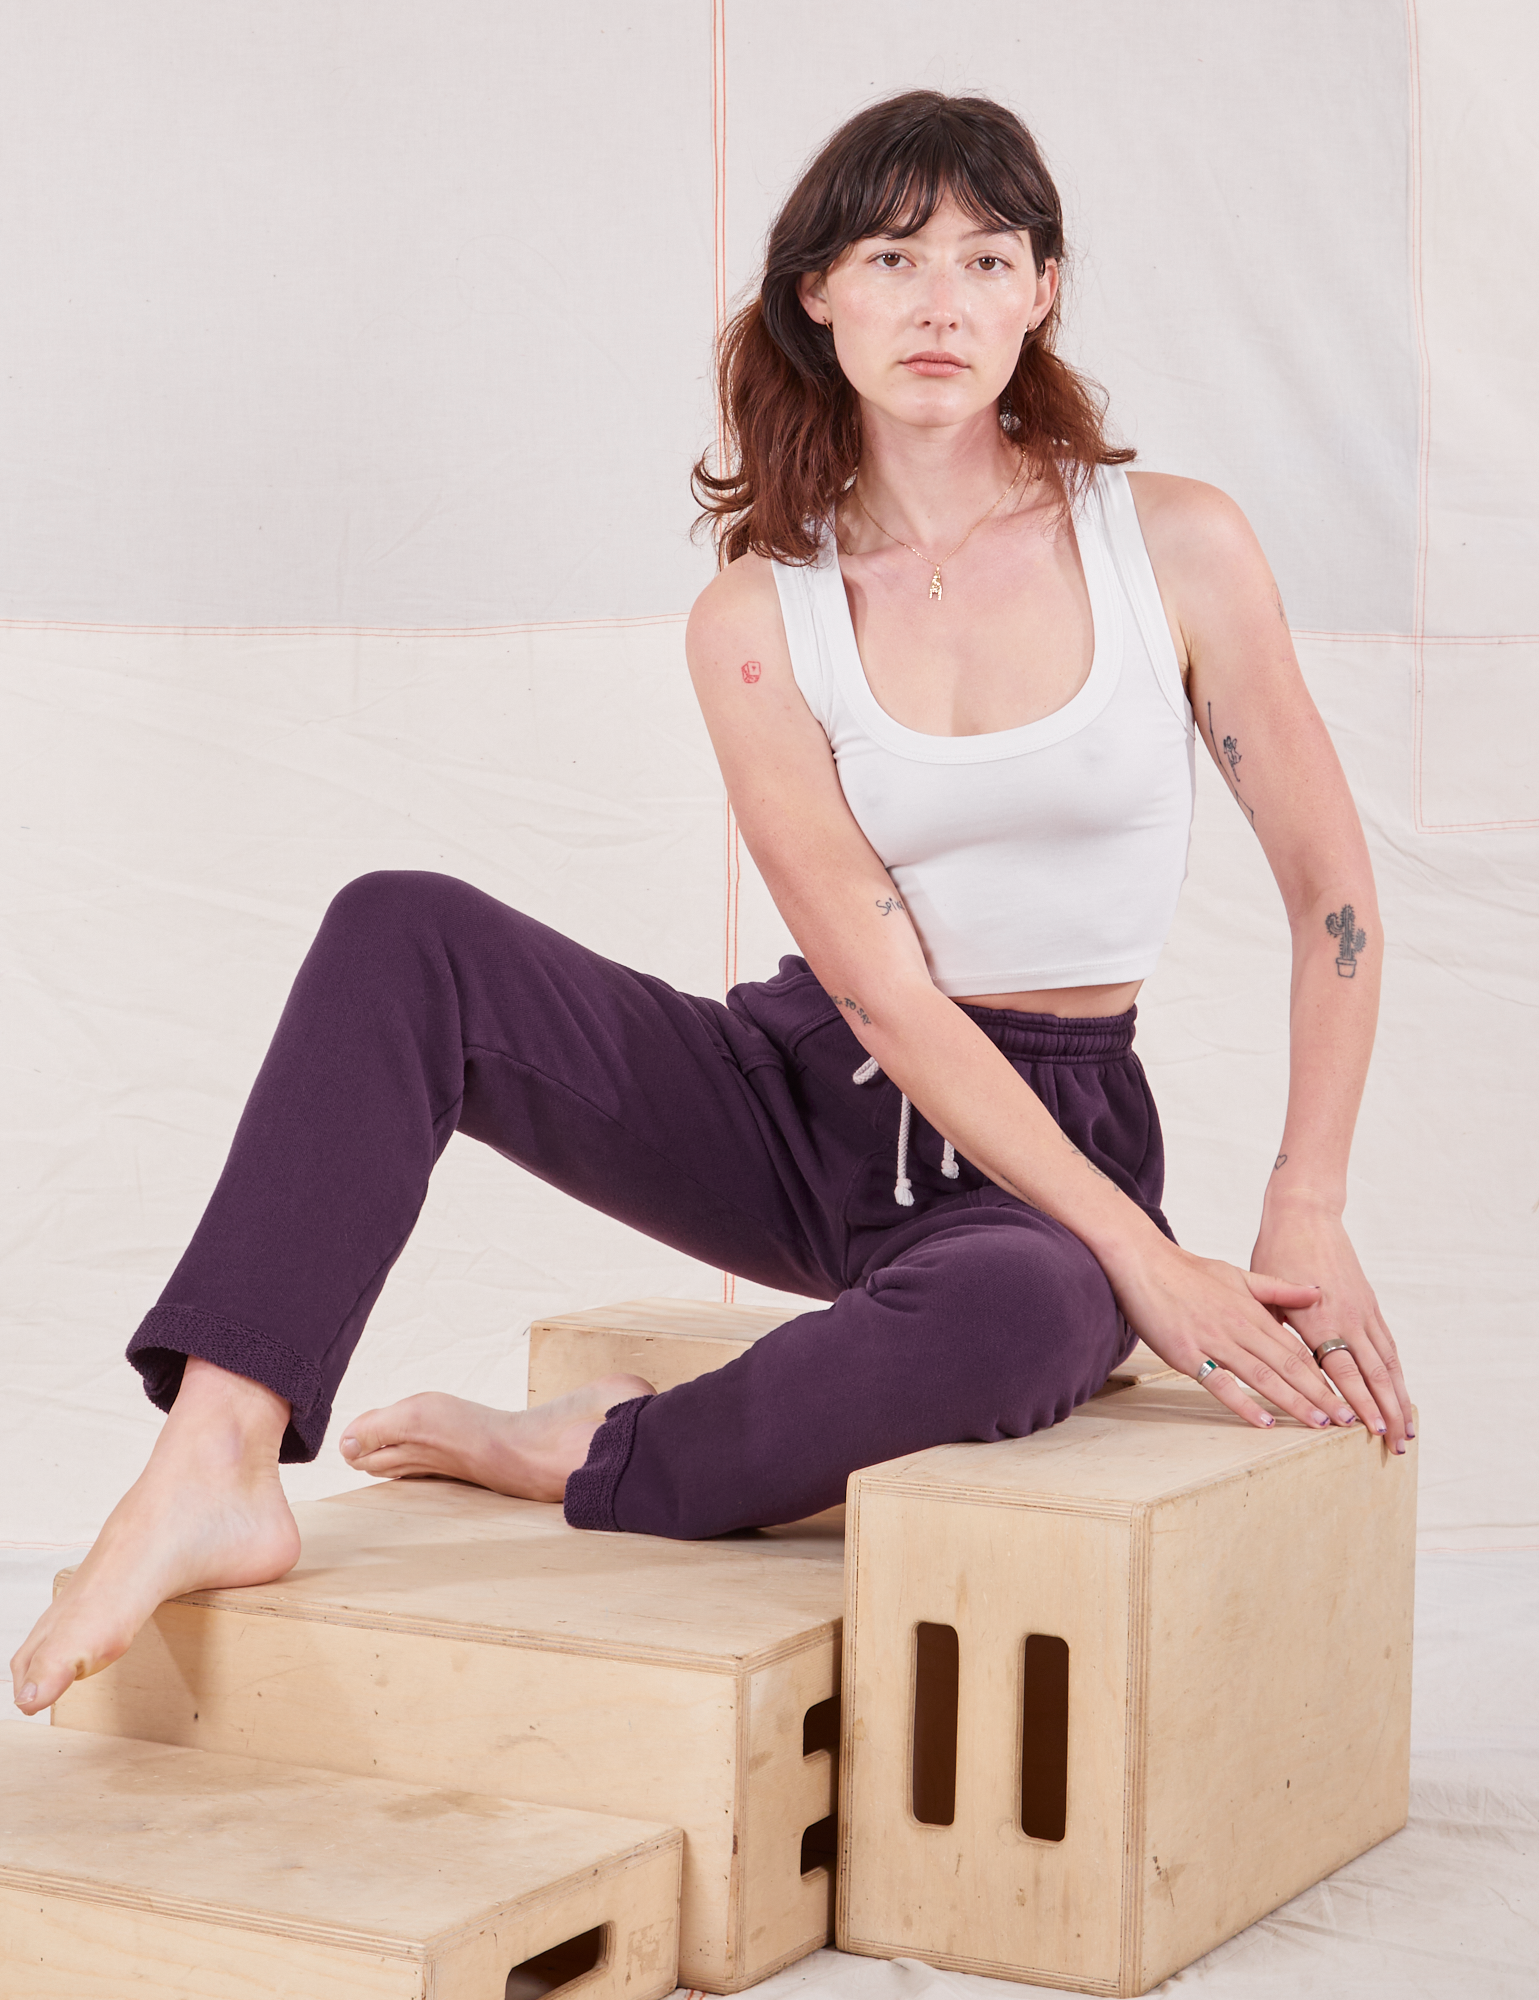 Alex is wearing Rolled Cuff Sweat Pants in Nebula Purple and vintage off-white Cropped Tank Top